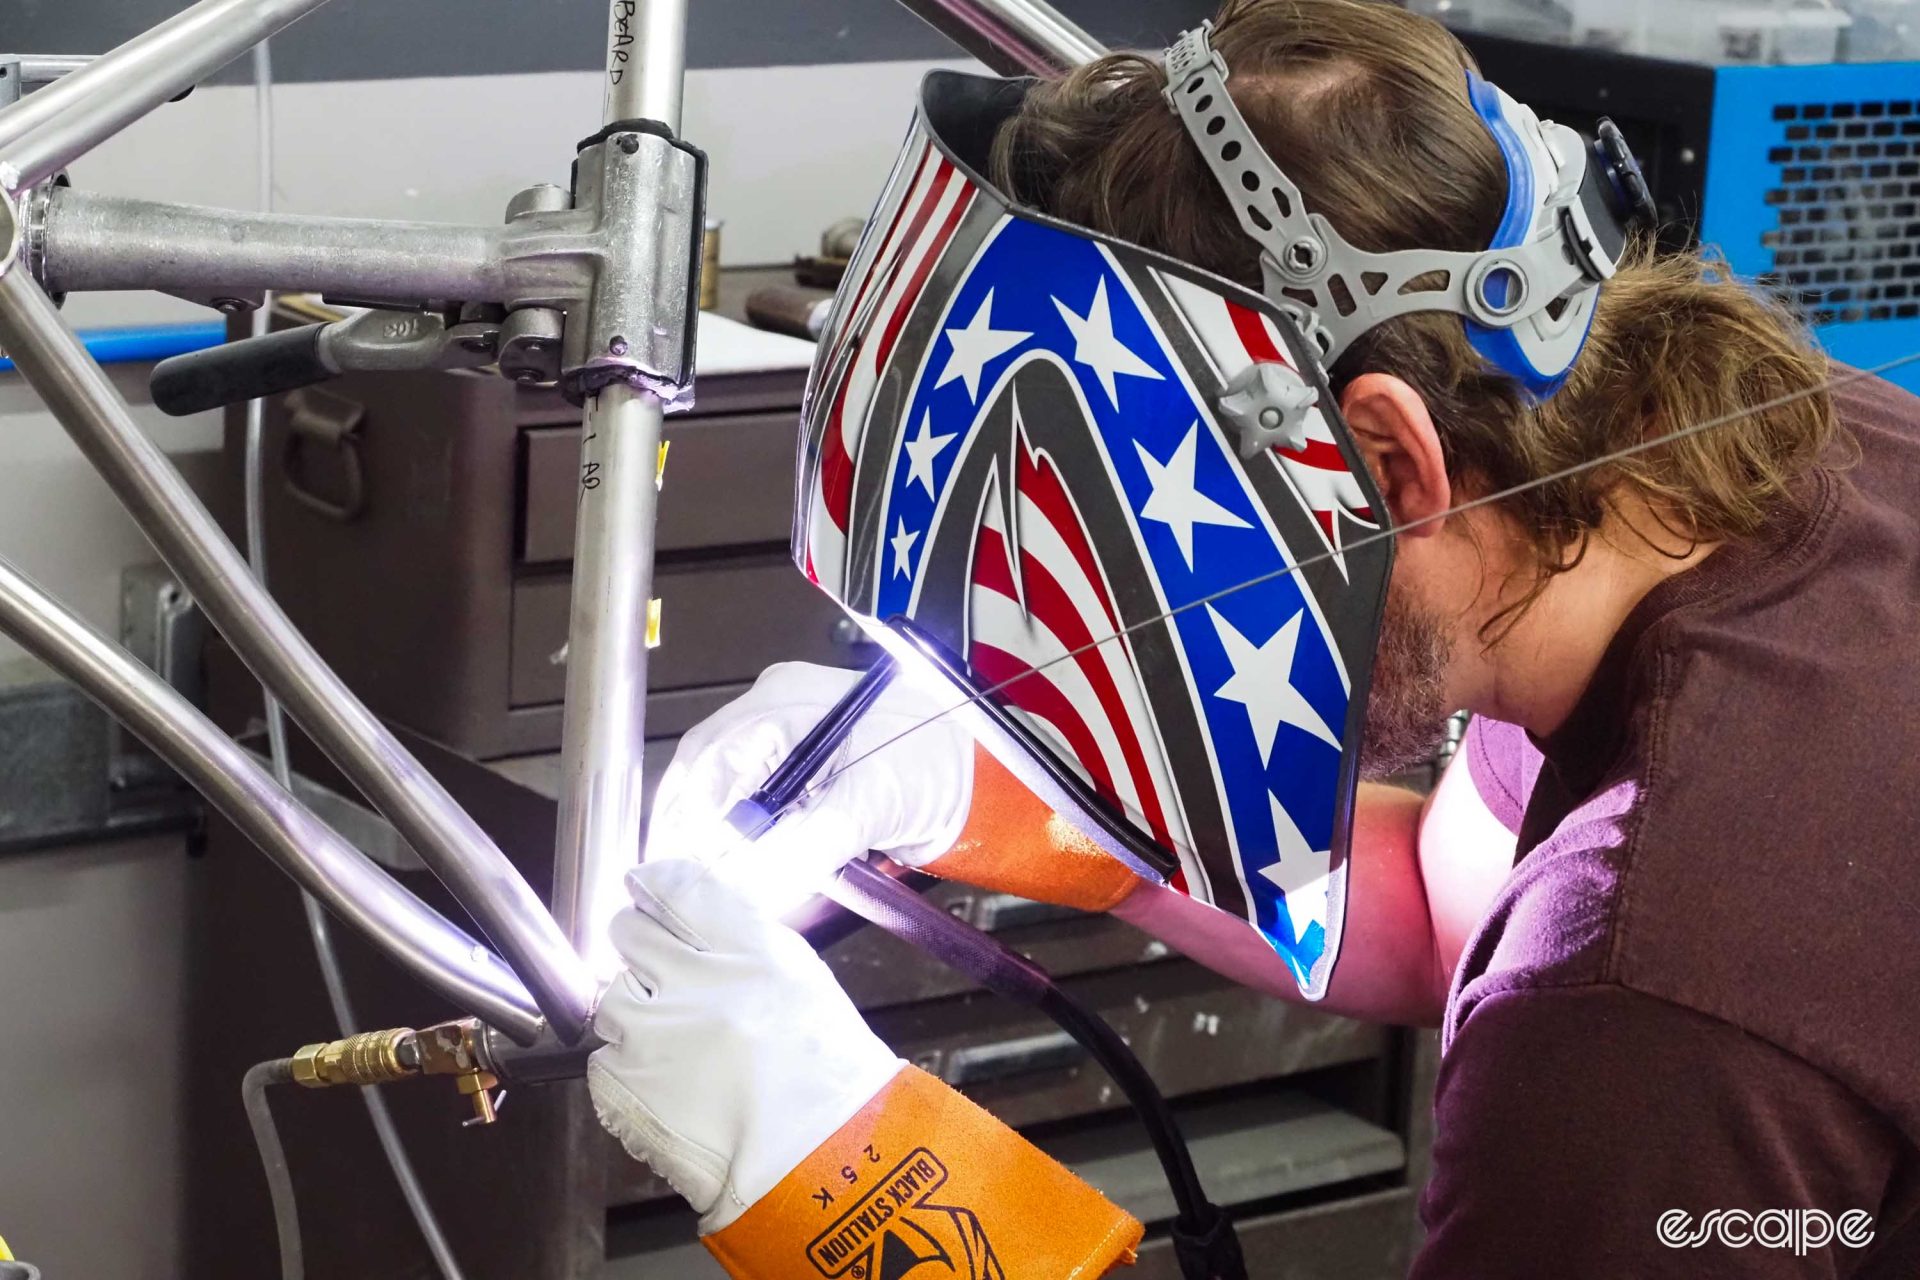 A welder in an American-flag stylized mask leans in to weld a bottom bracket juncture. His hands are brightly lit by the welding arc.